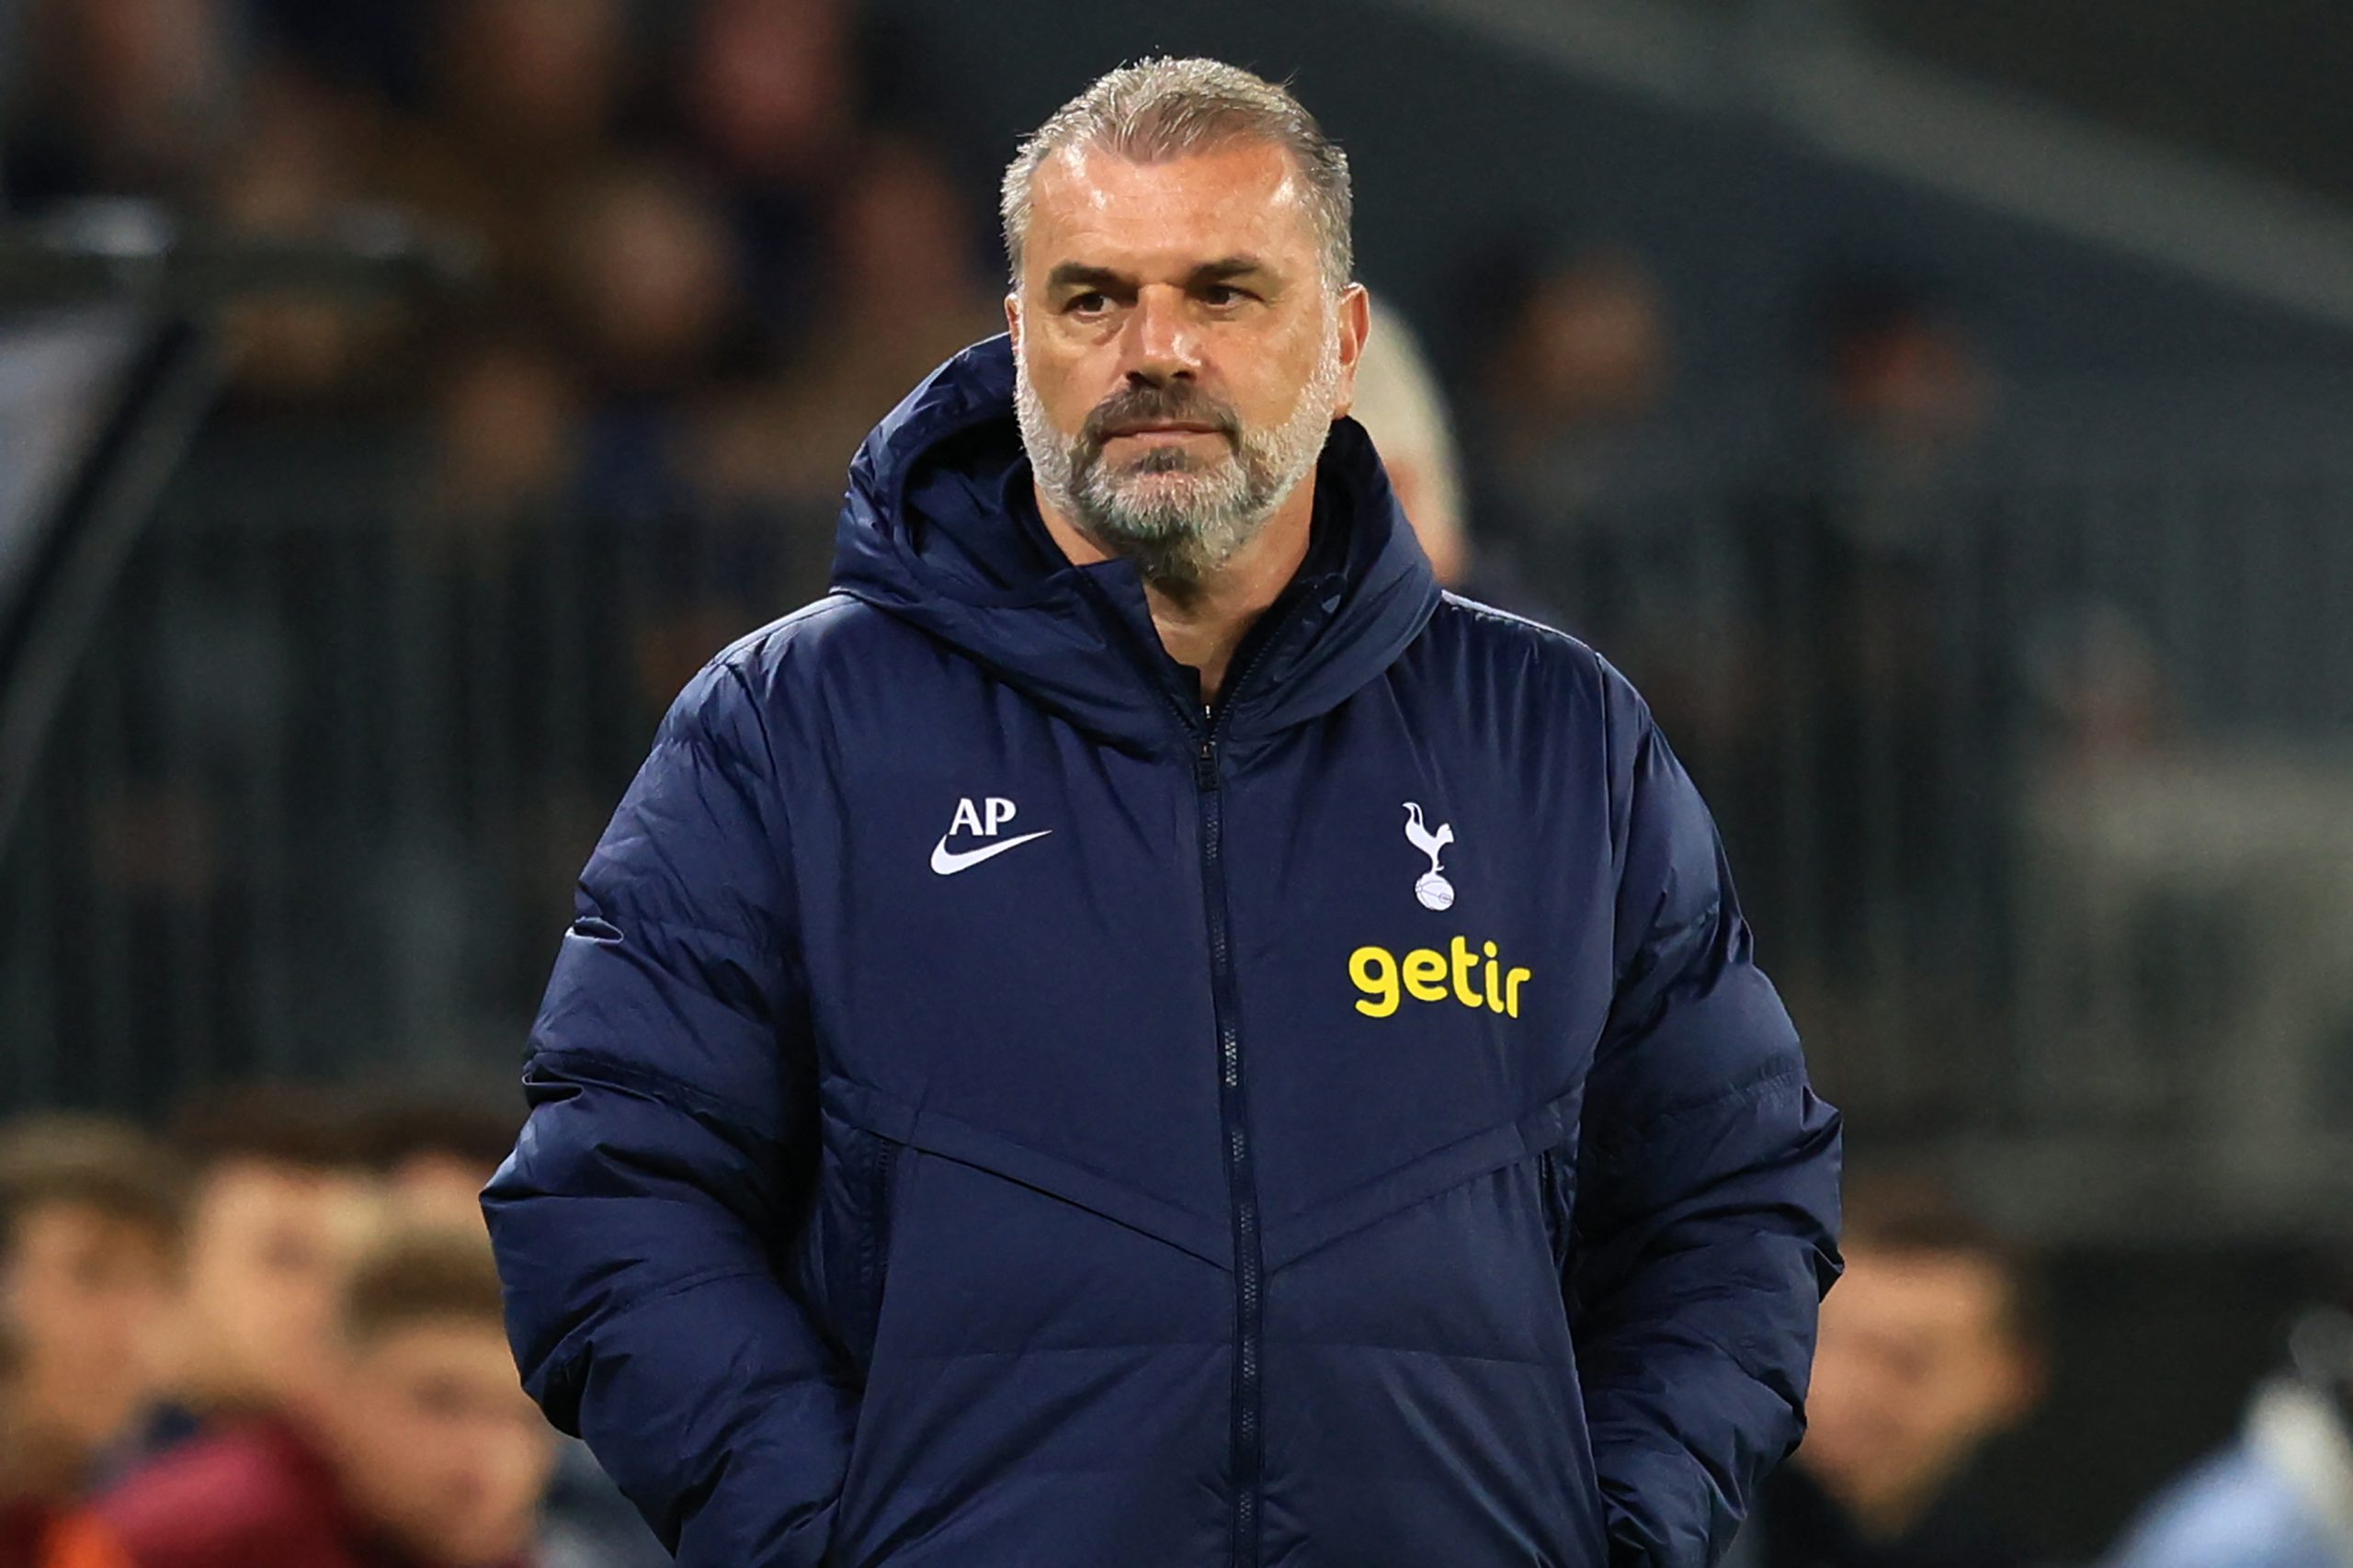 Hugo Lloris says Ange Postecoglou has achieved a lot within a short time